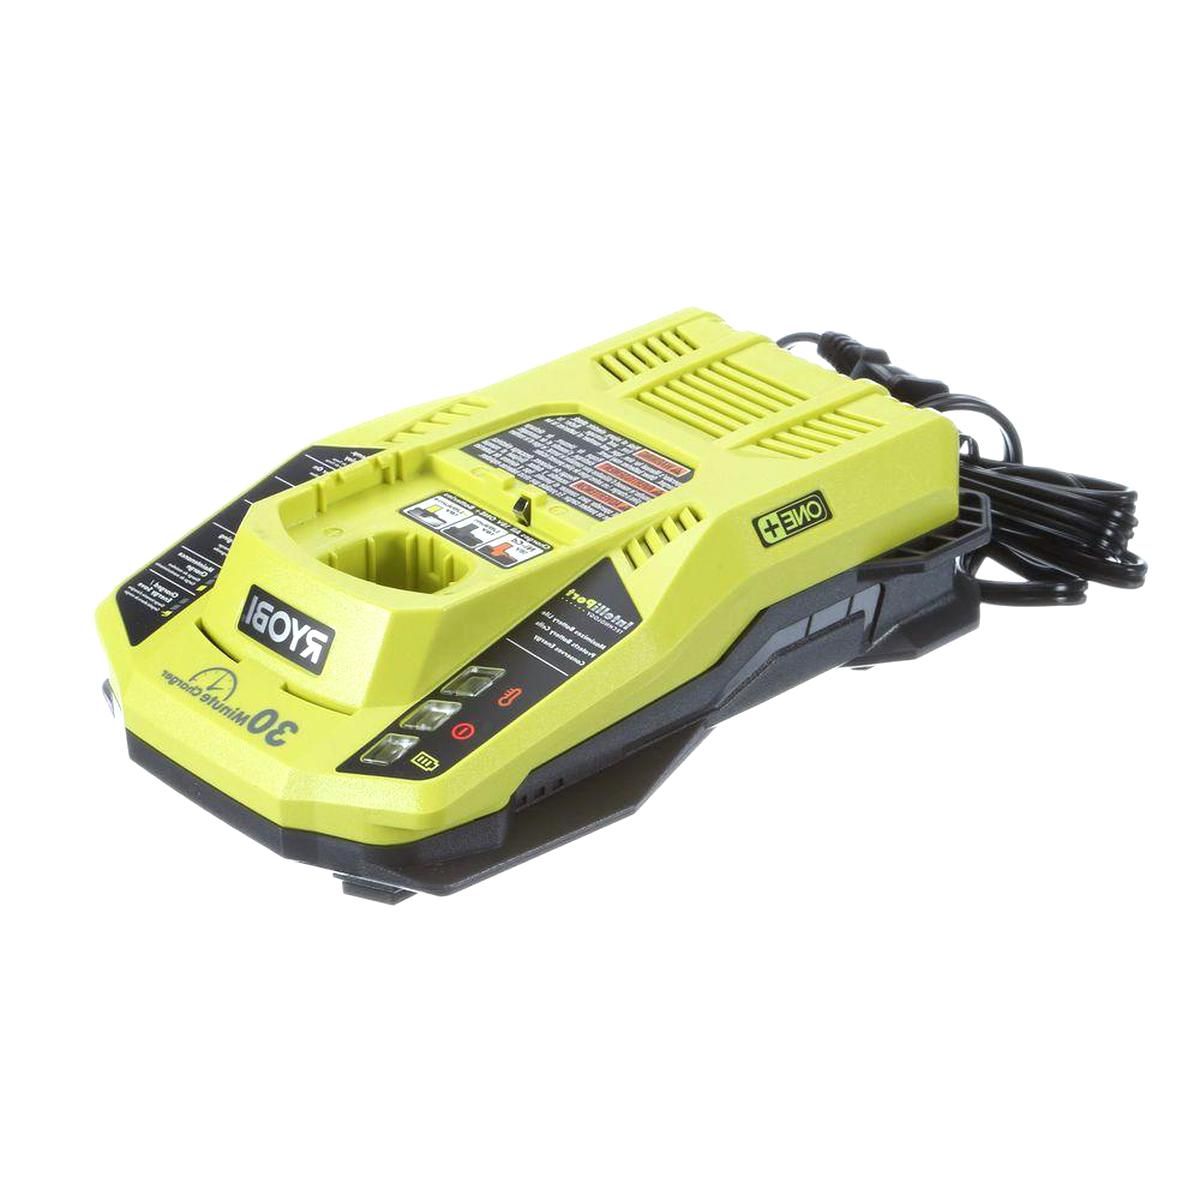 Ryobi Charger For Sale In Uk 72 Used Ryobi Chargers